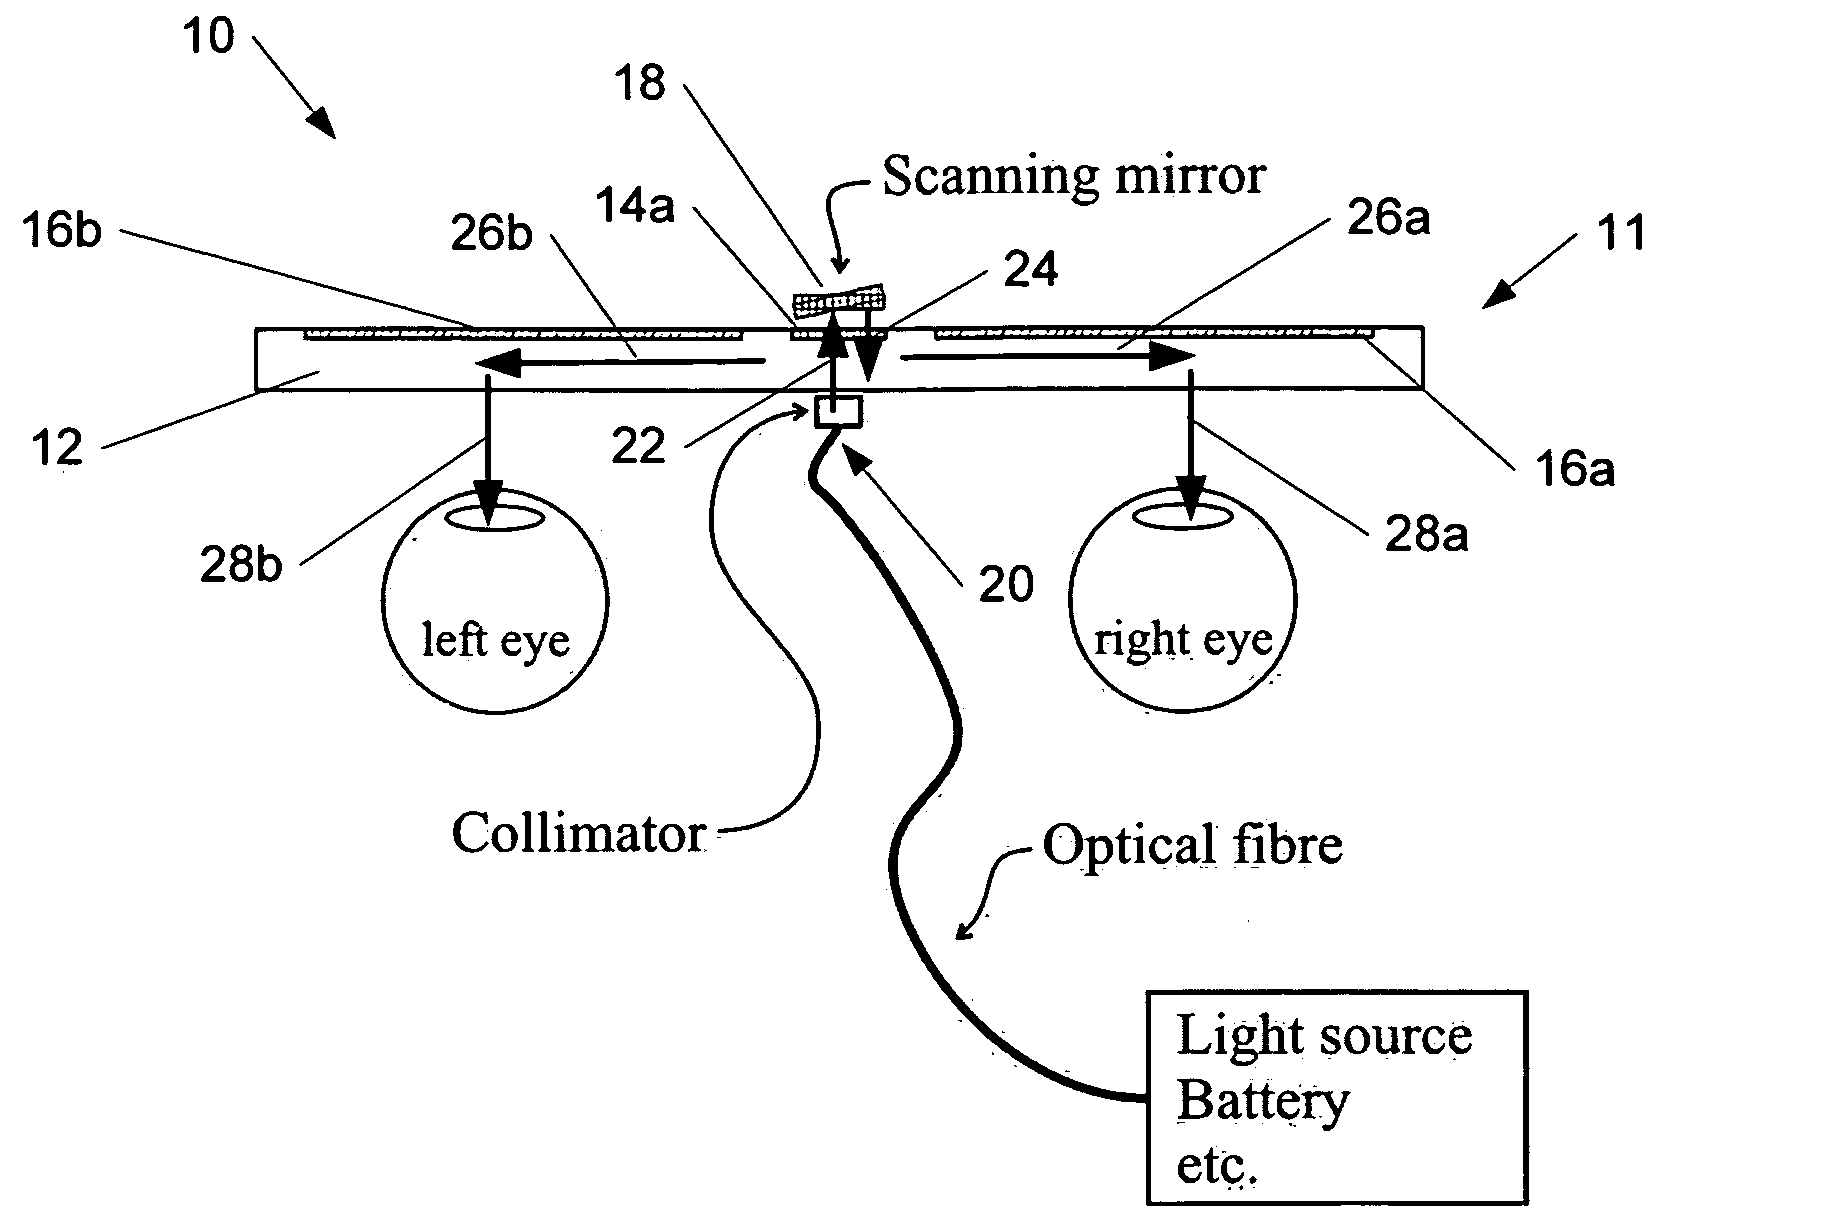 Near-to-eye scanning display with exit-pupil expansion